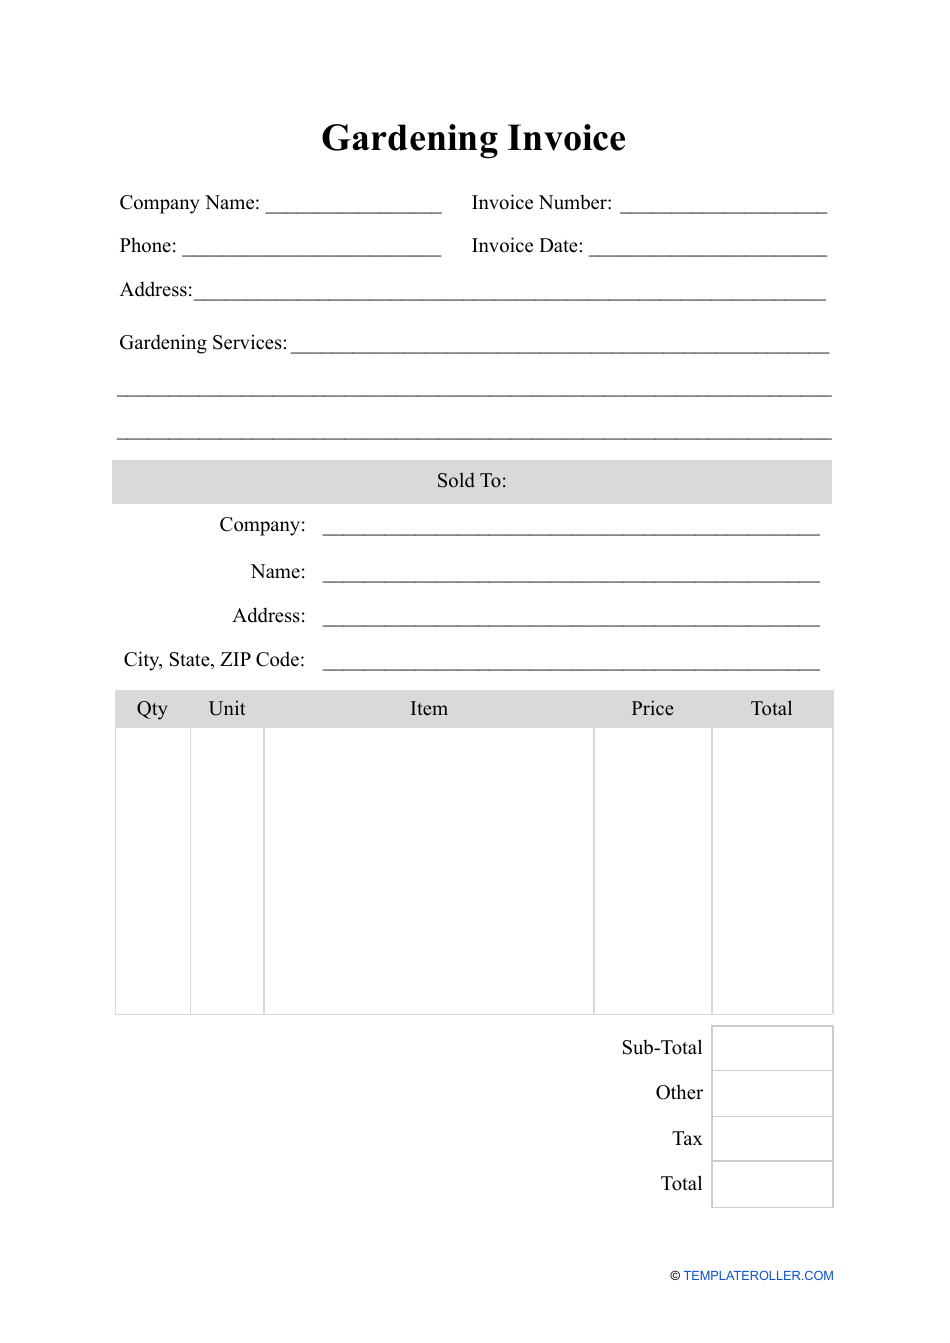 Gardener Invoice Template, Page 1